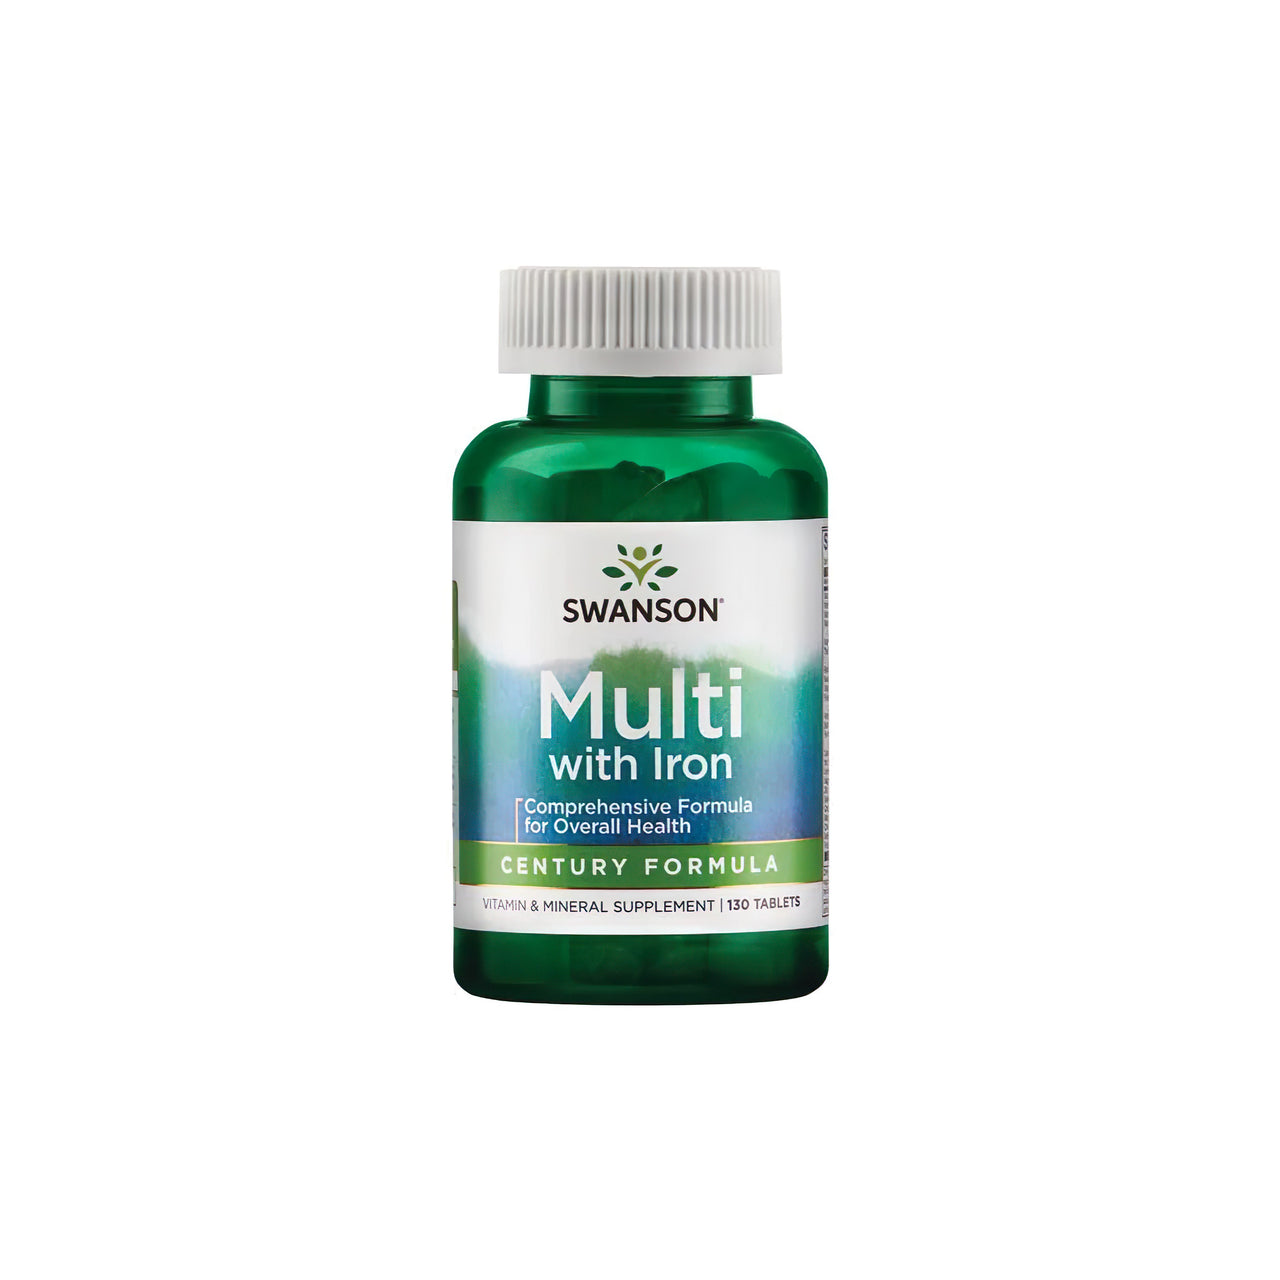 A bottle of Multi with Iron 130 Tab Century Formula by Swanson, with essential vitamins and minerals including antioxidant protection.